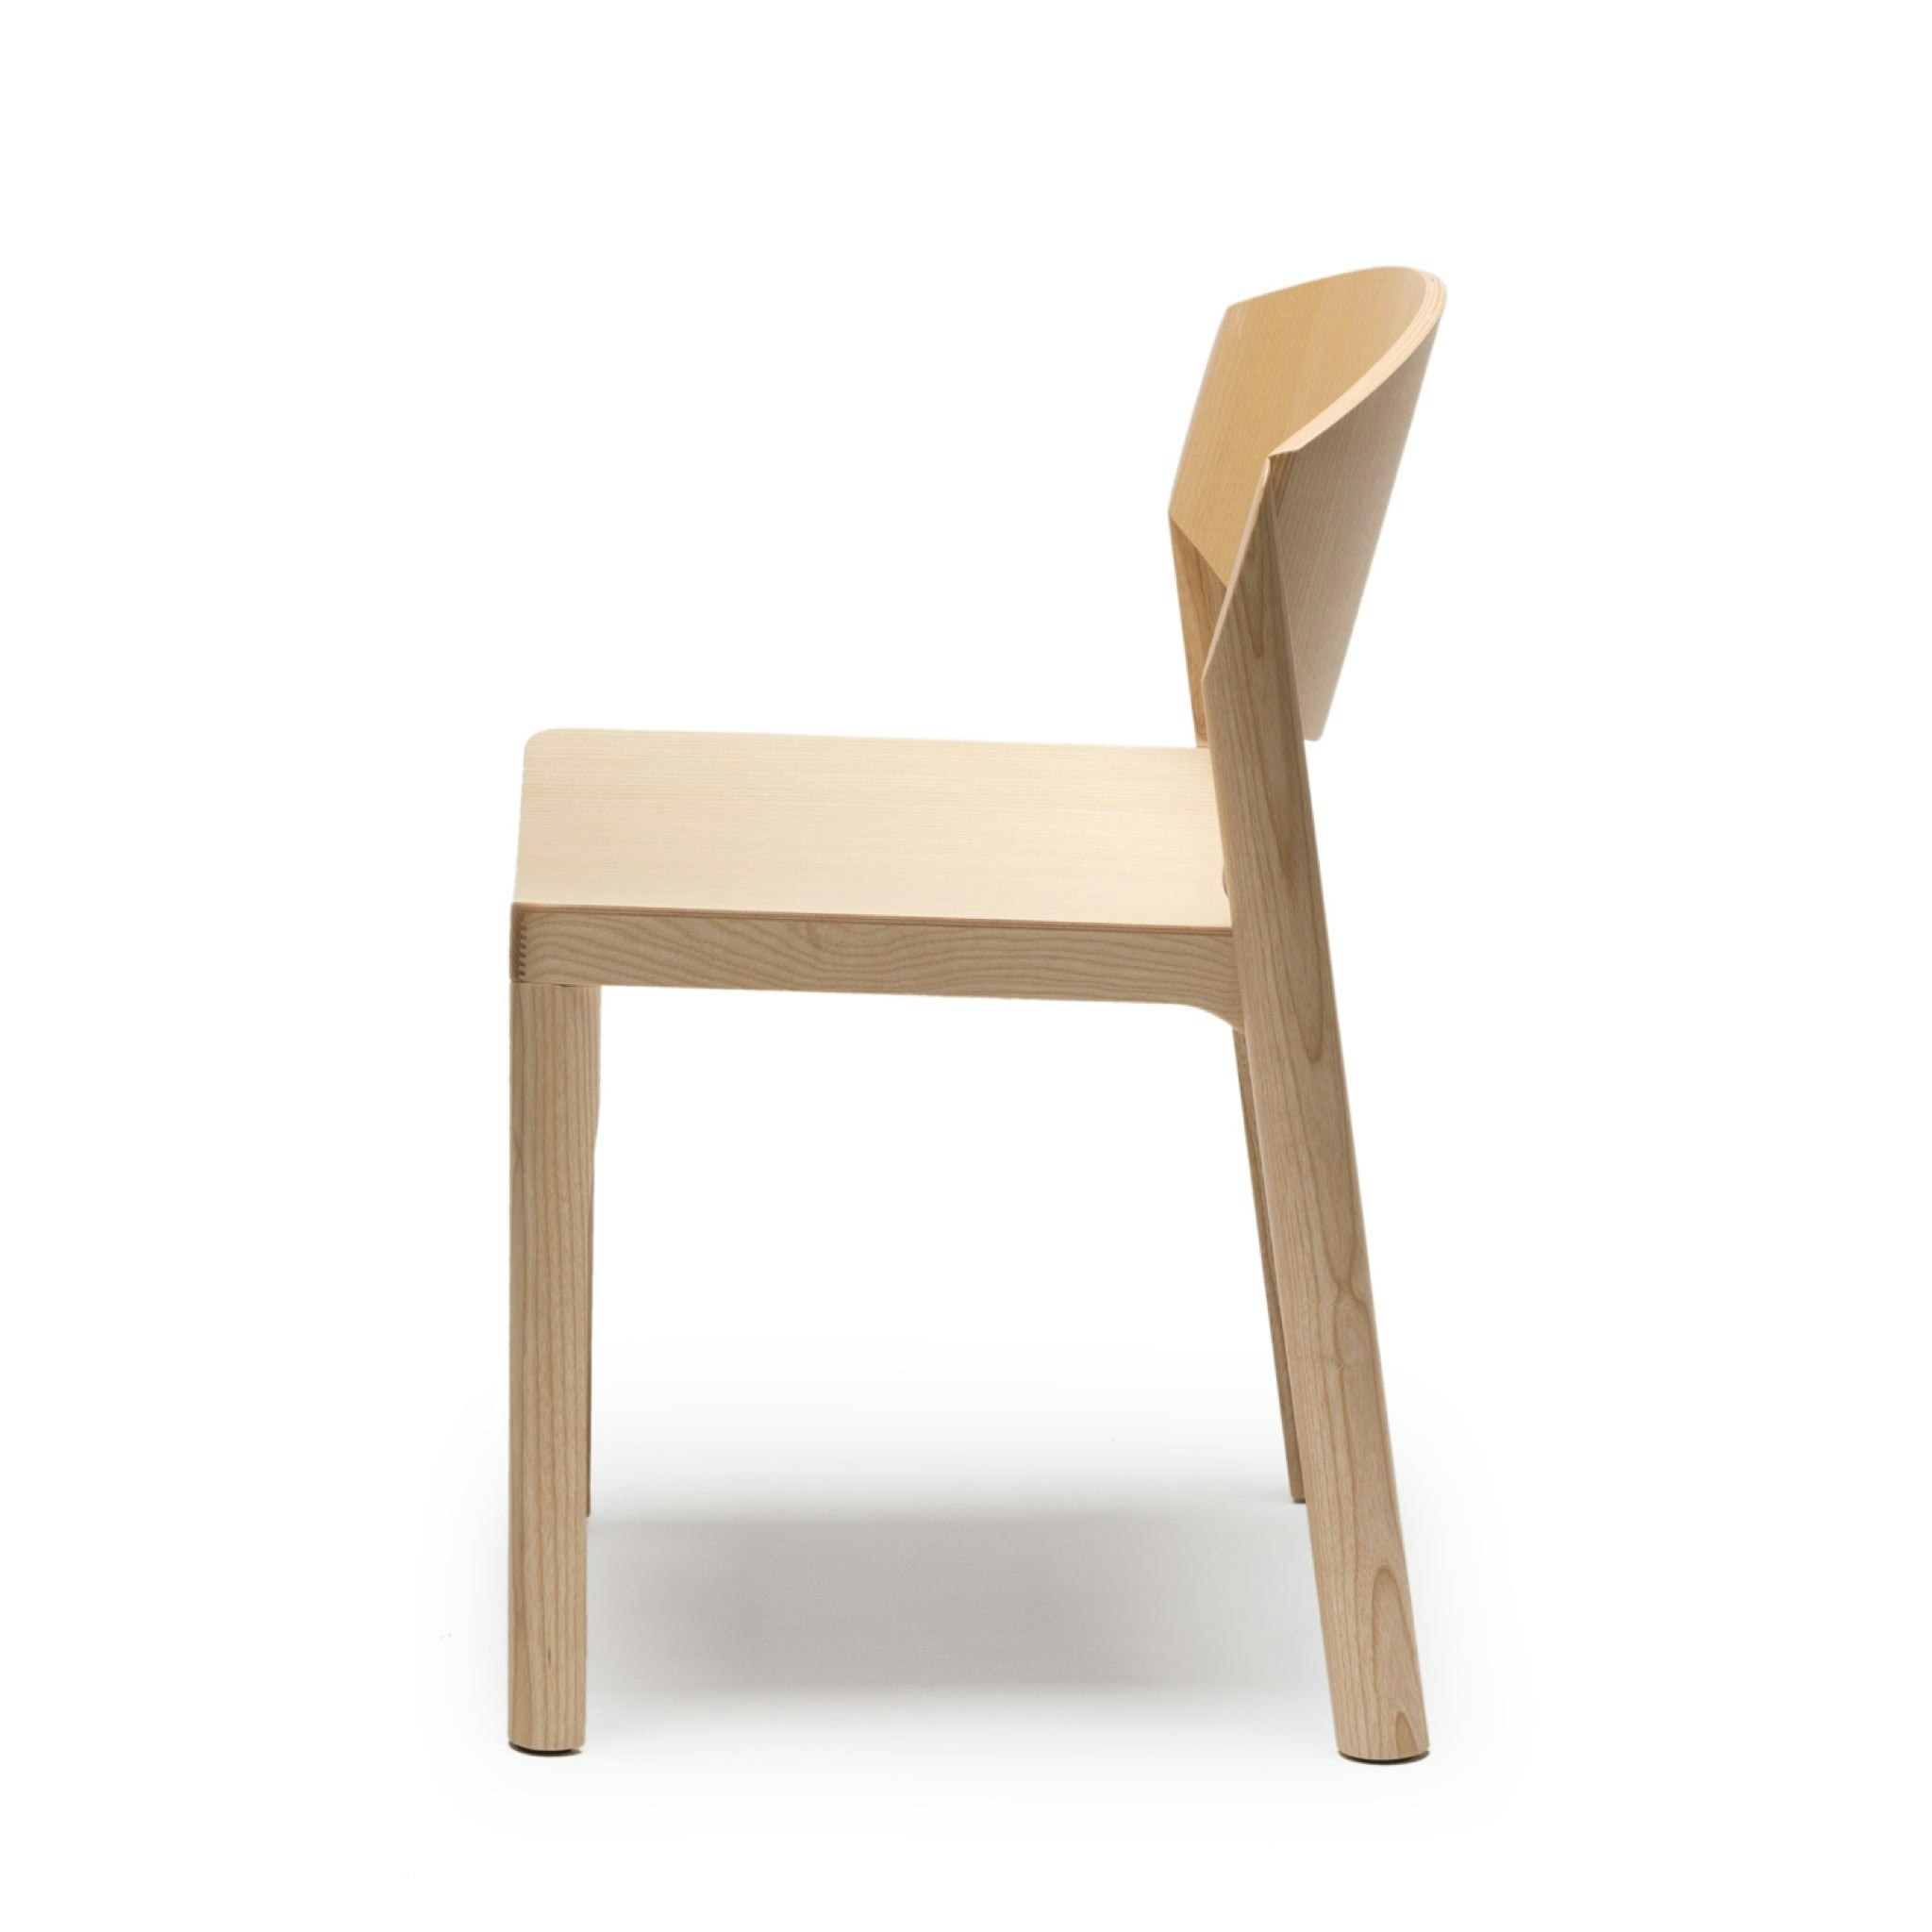 Mauro Chair by Established & Sons